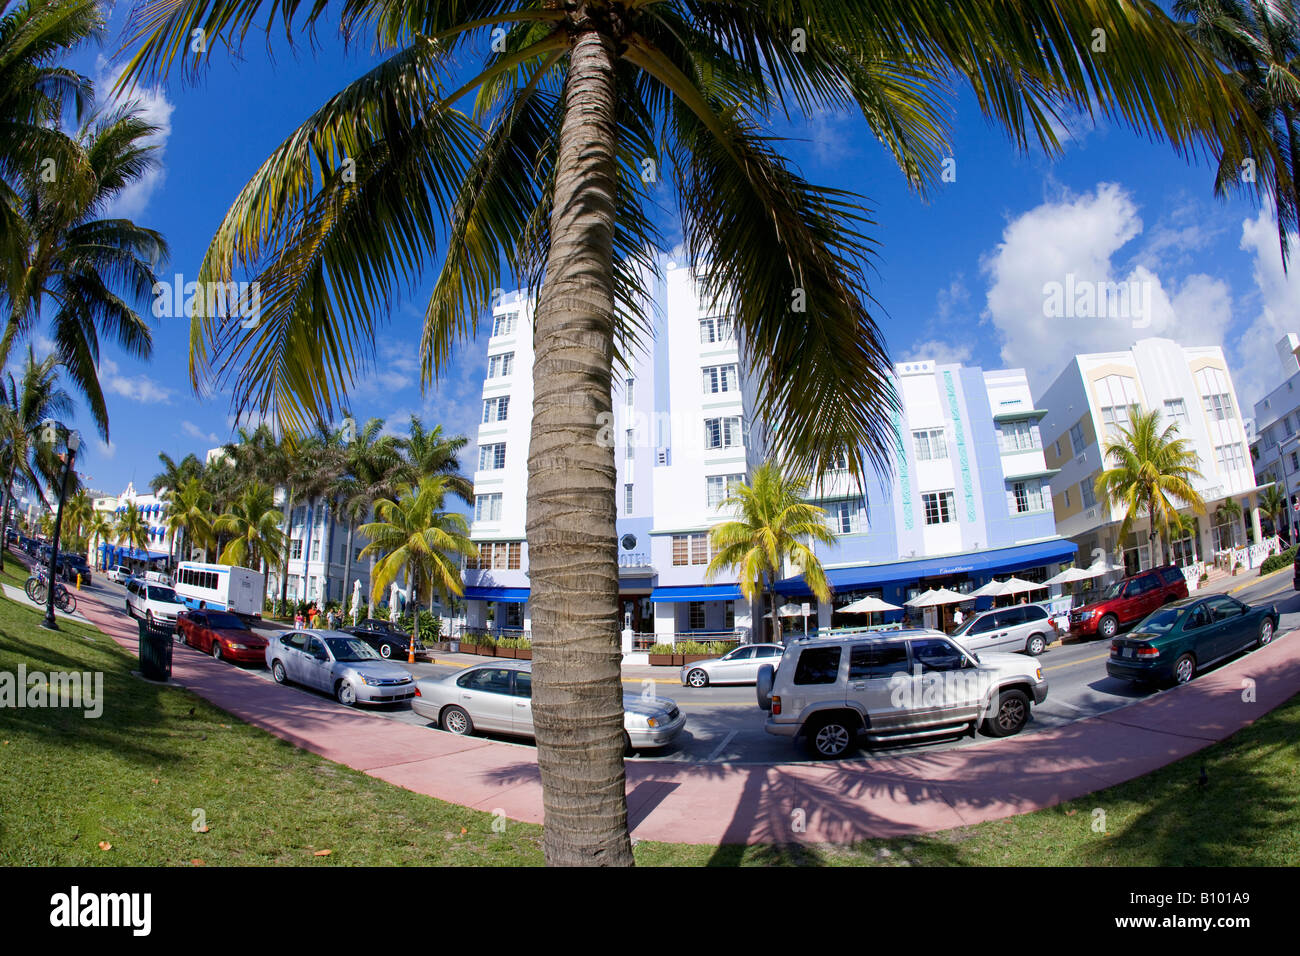 Buildings and shops in South Beach, Miami Beach, Florida Stock Photo